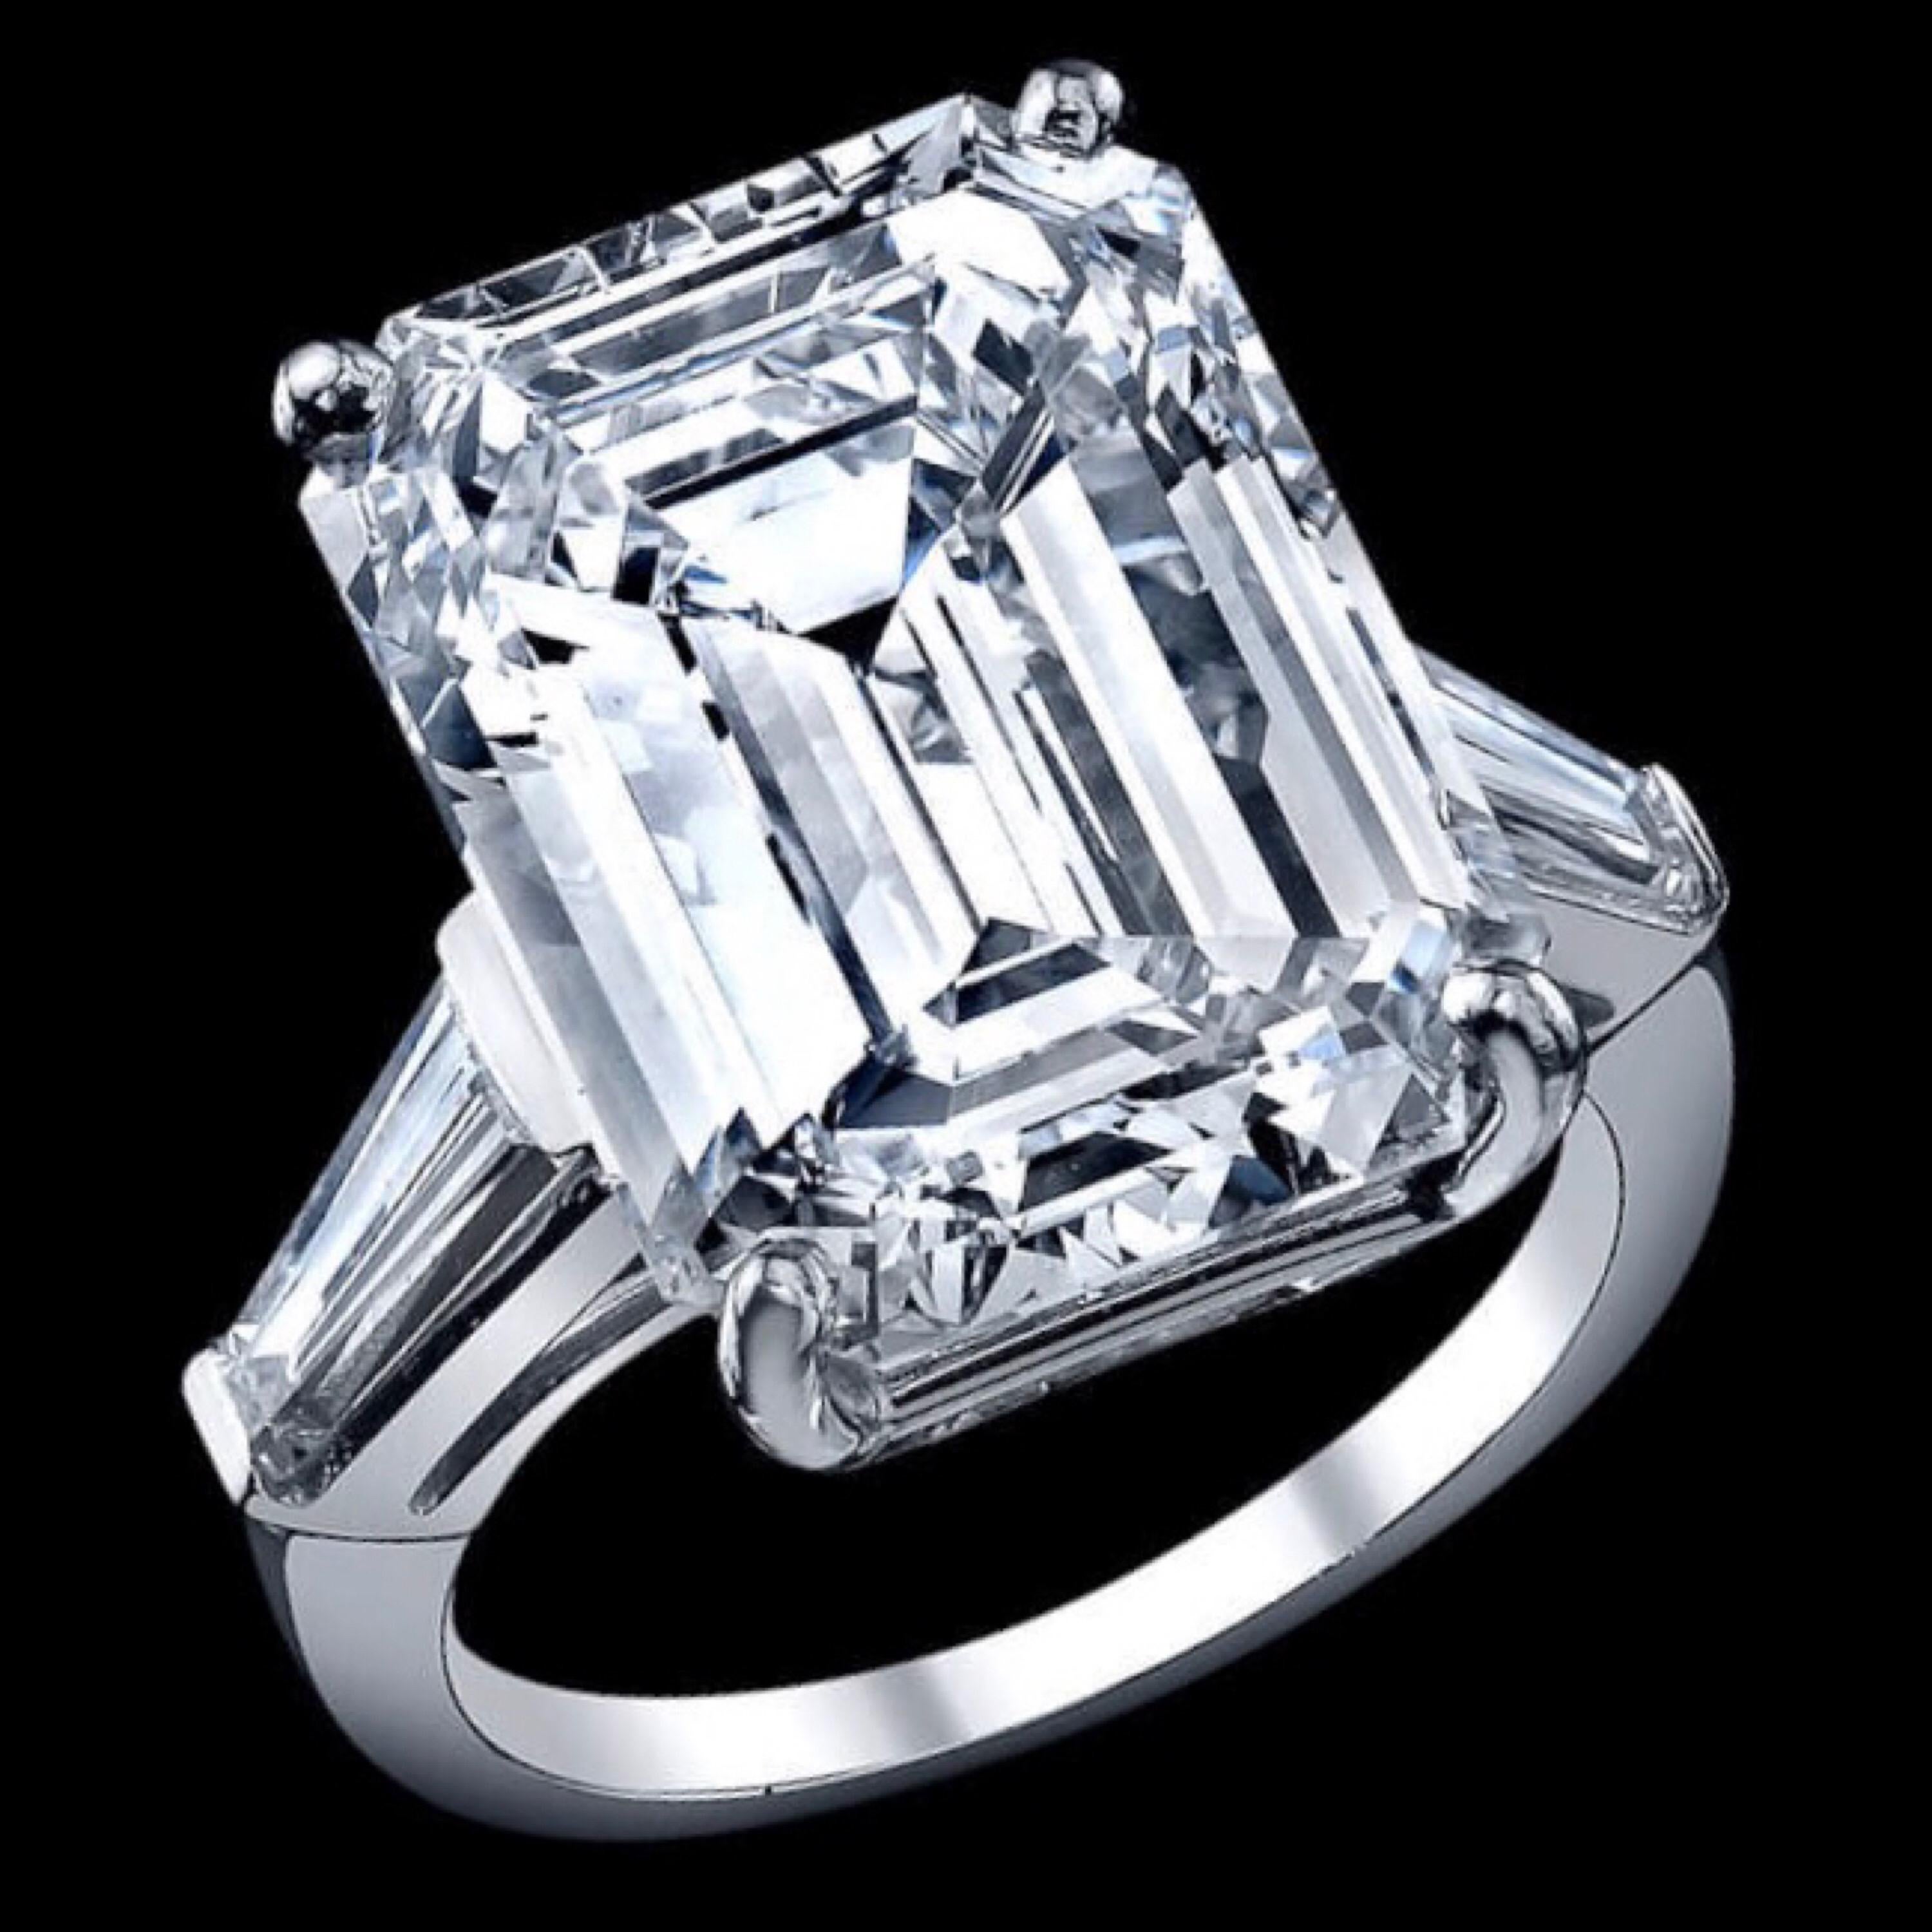 From the Emilio Jewelry Vault, We are Showcasing a Gia certified 10.00 carat natural Gia certified Emerald cut diamond in the center. Certified internally flawless making this an investment grade stone. 
This piece was Hand made in the Emilio